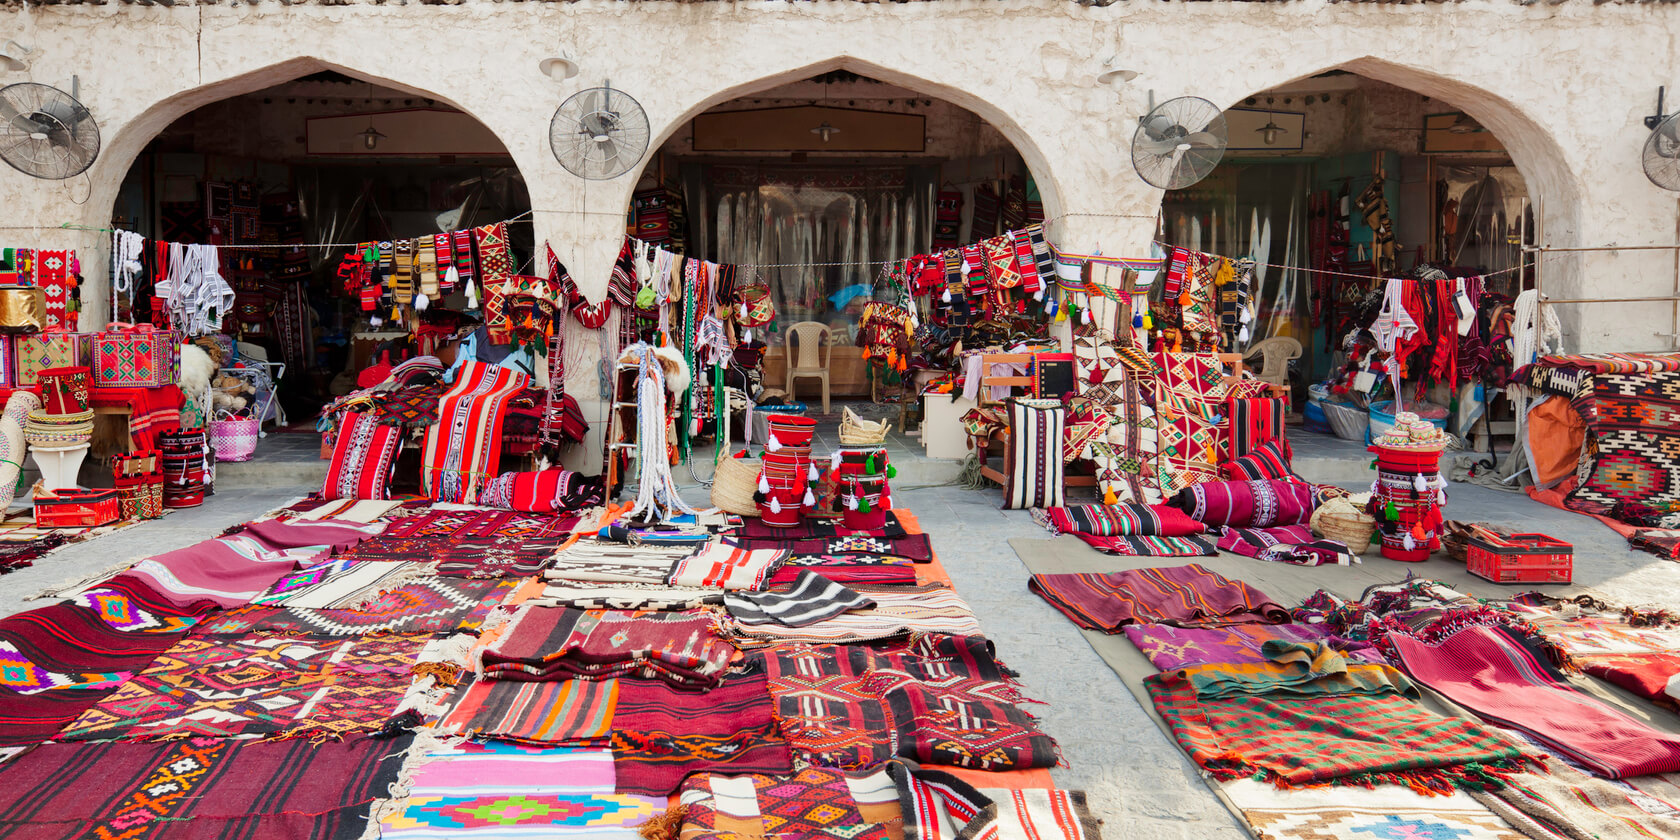 Textile shop along the street in the Souq Waqif area in Doha, Qatar.